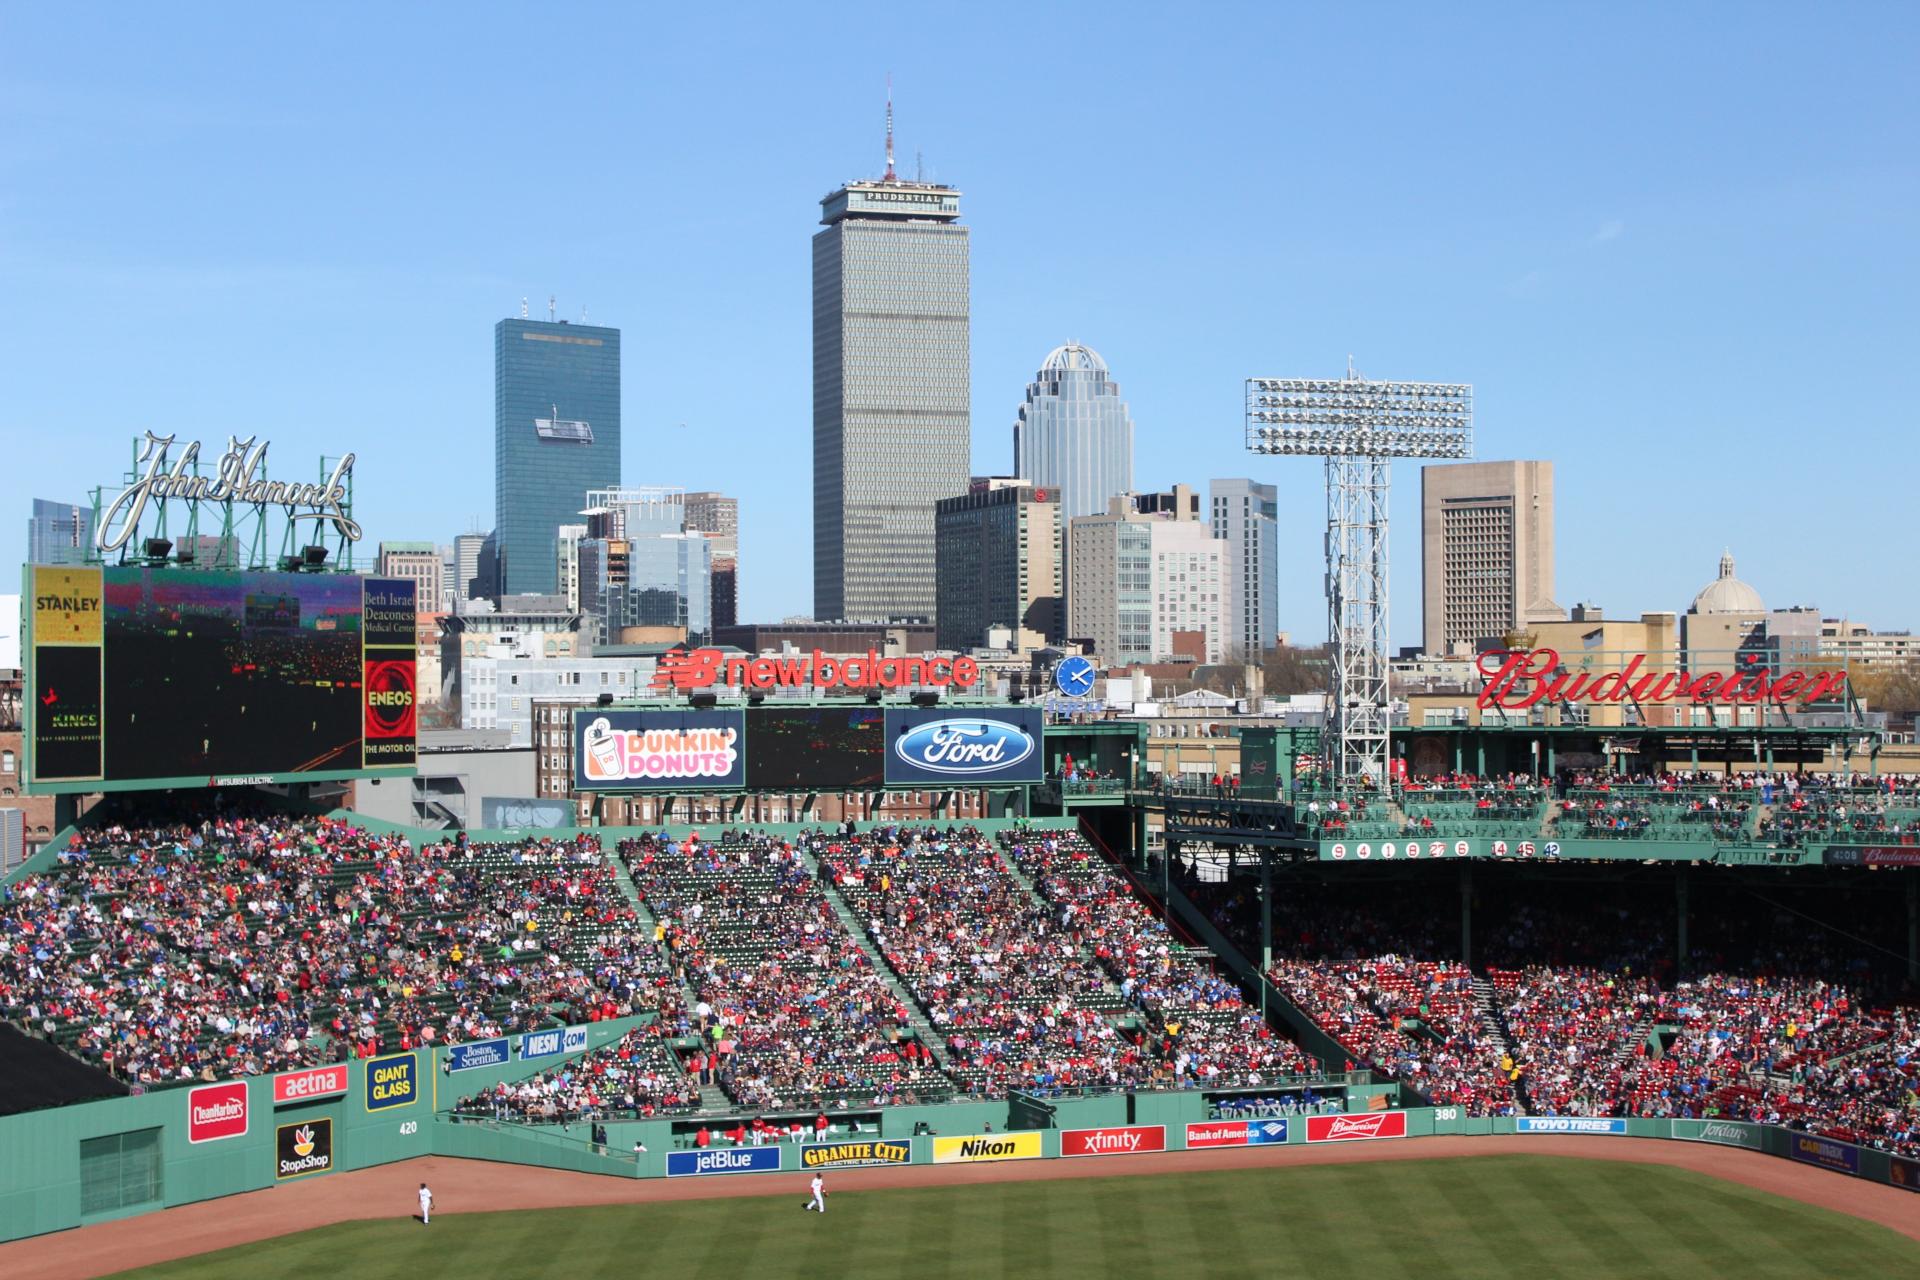 Fenway Stadium during a Red Sox Game